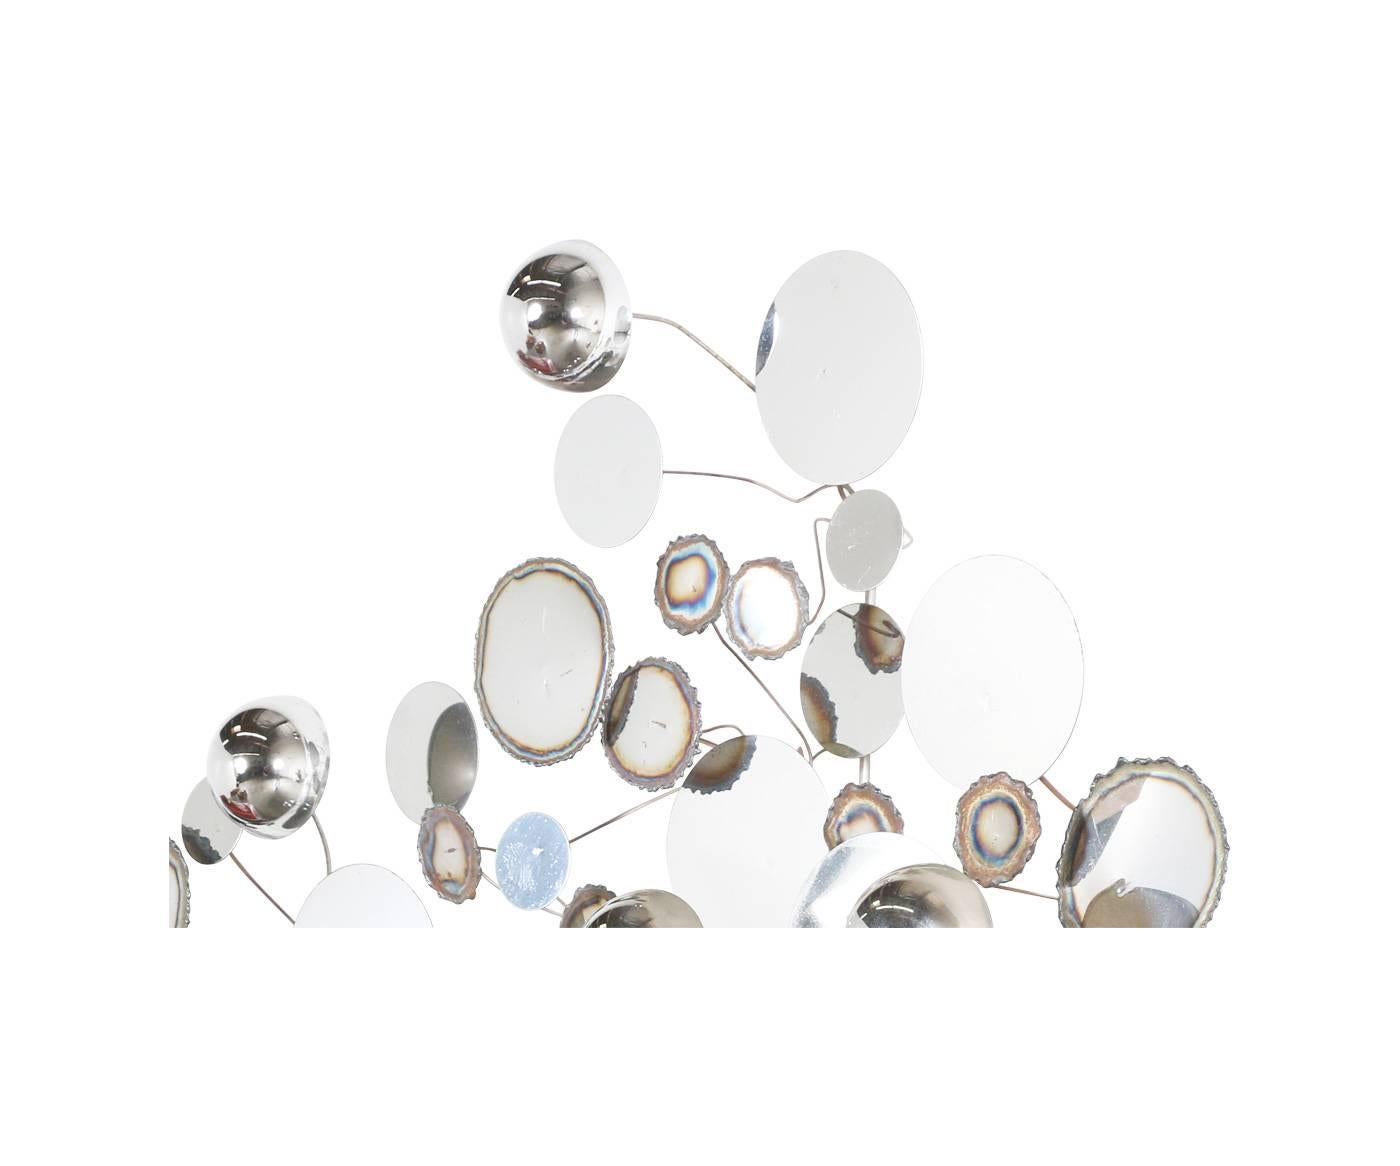 American Curtis Jere “Raindrops” Chrome Wall Sculpture for Artsian House